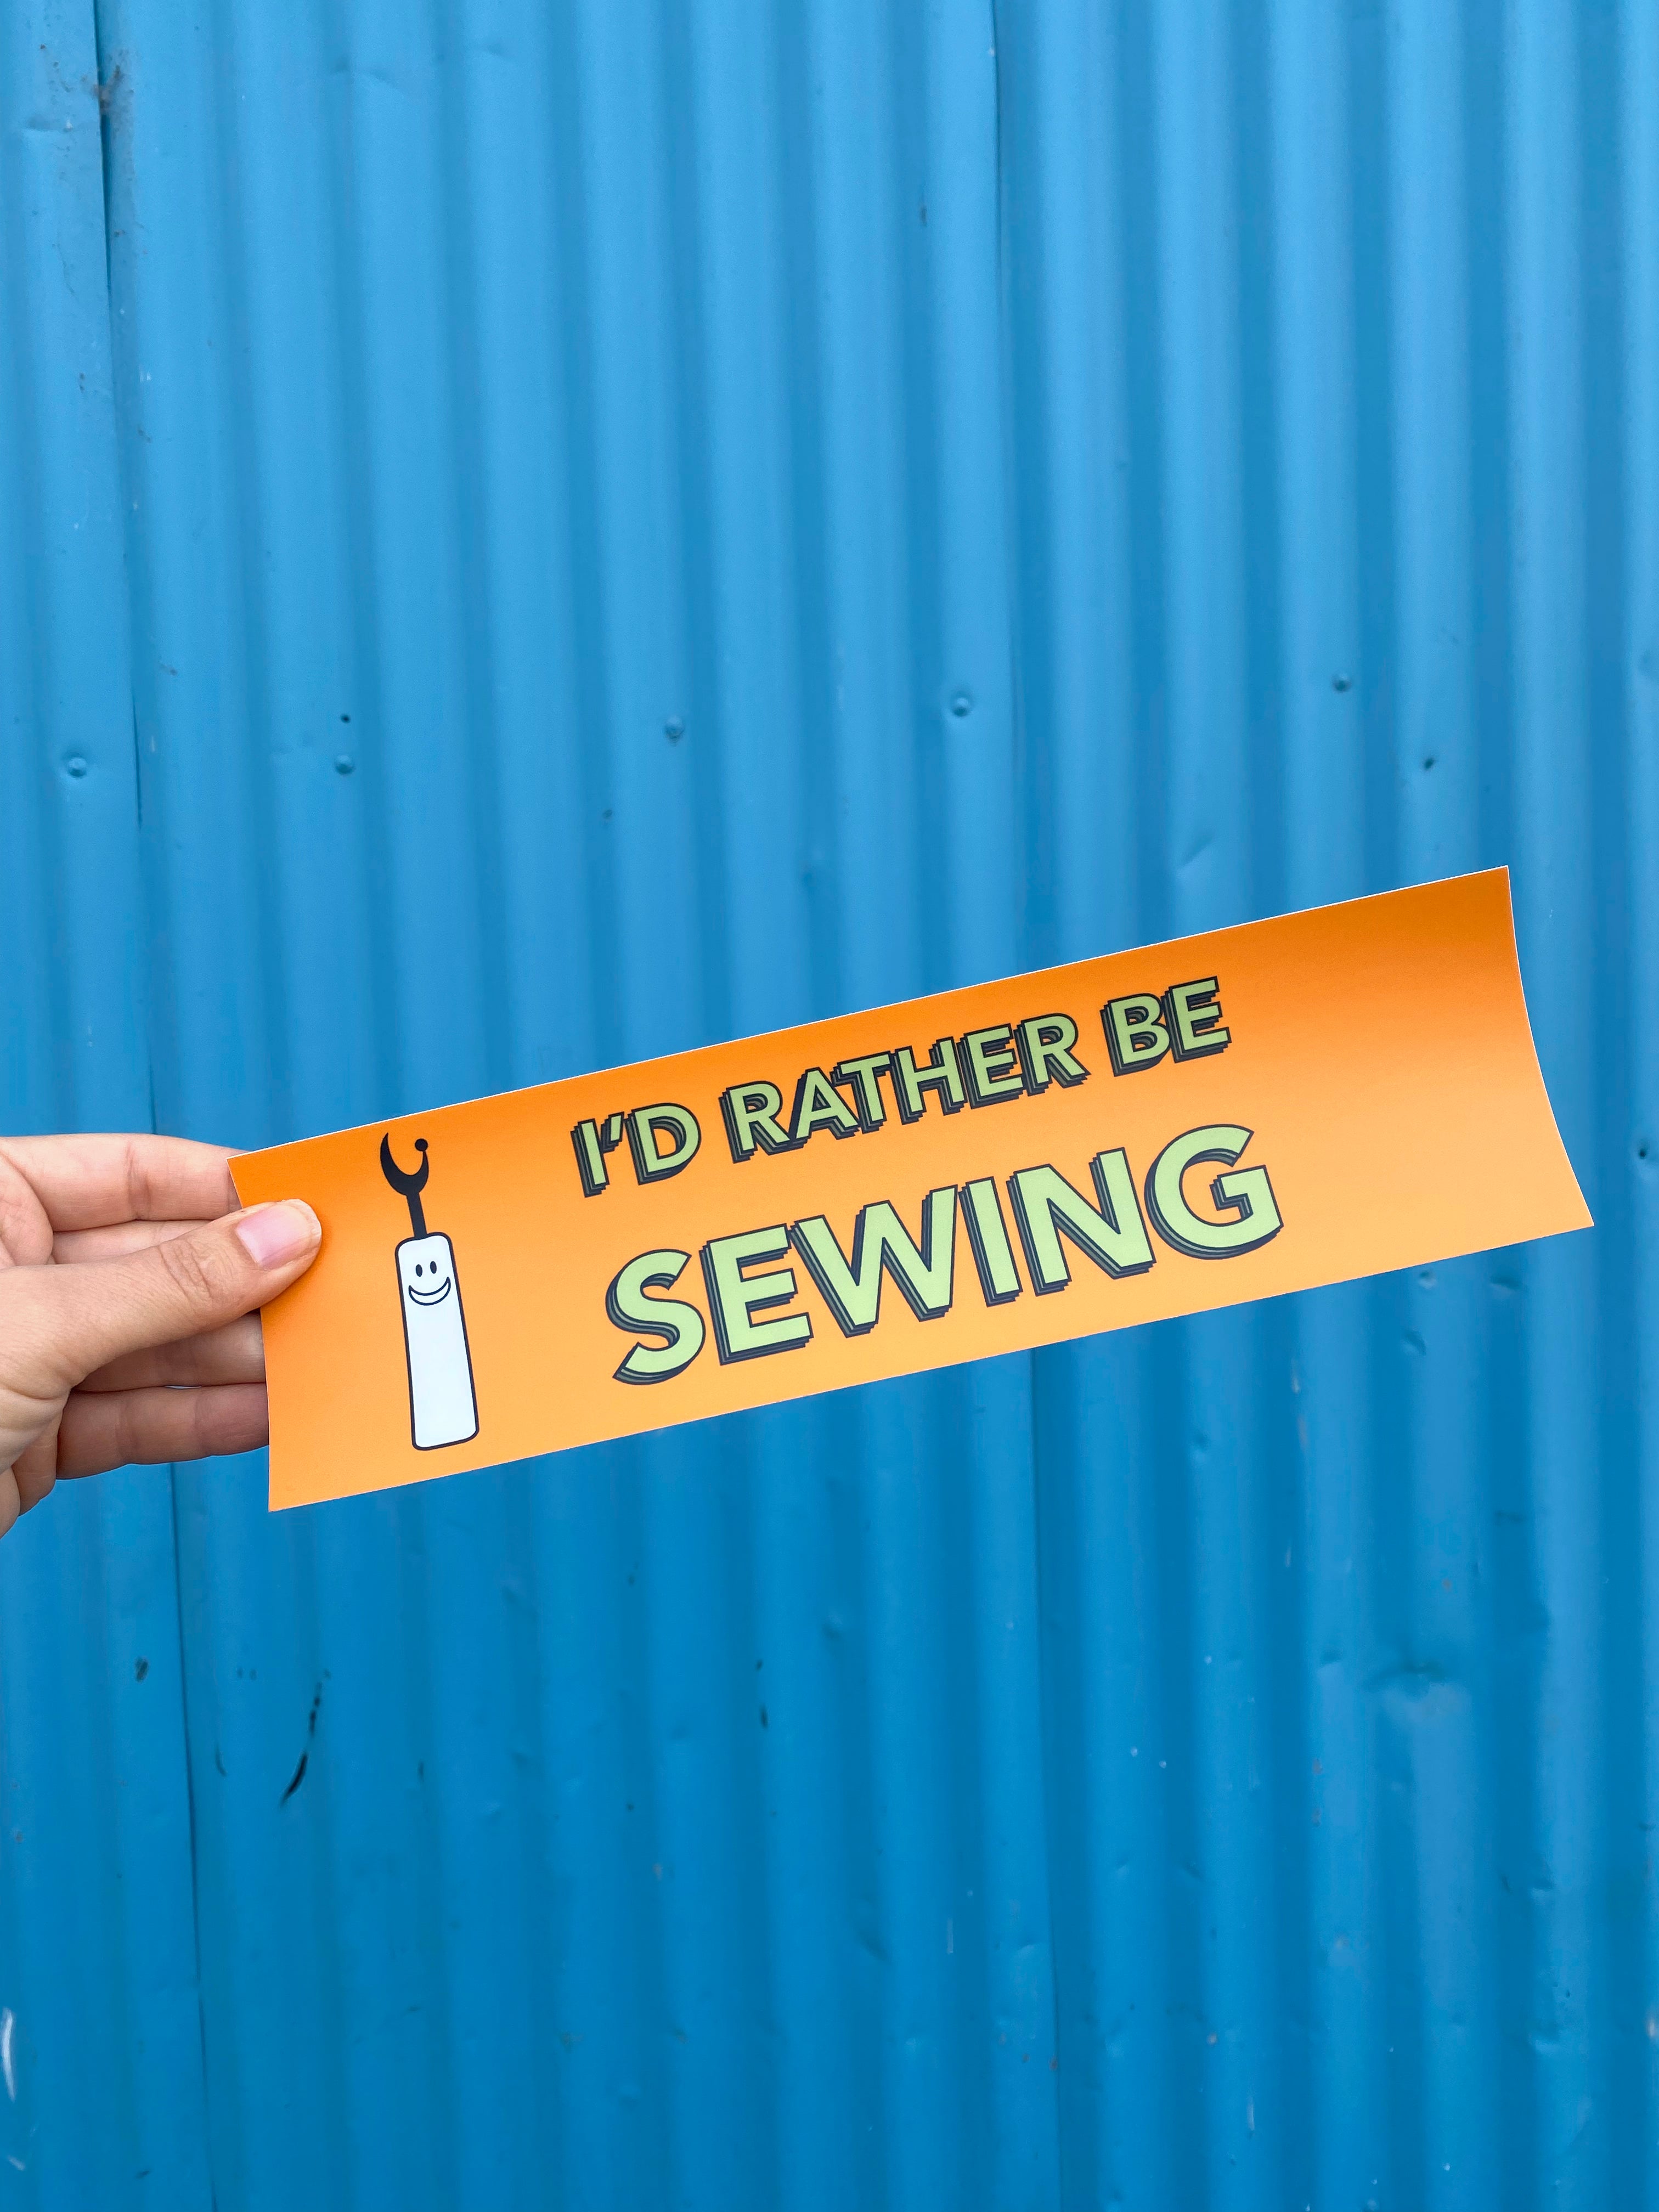 I'd Rather Be Sewing Bumper Sticker